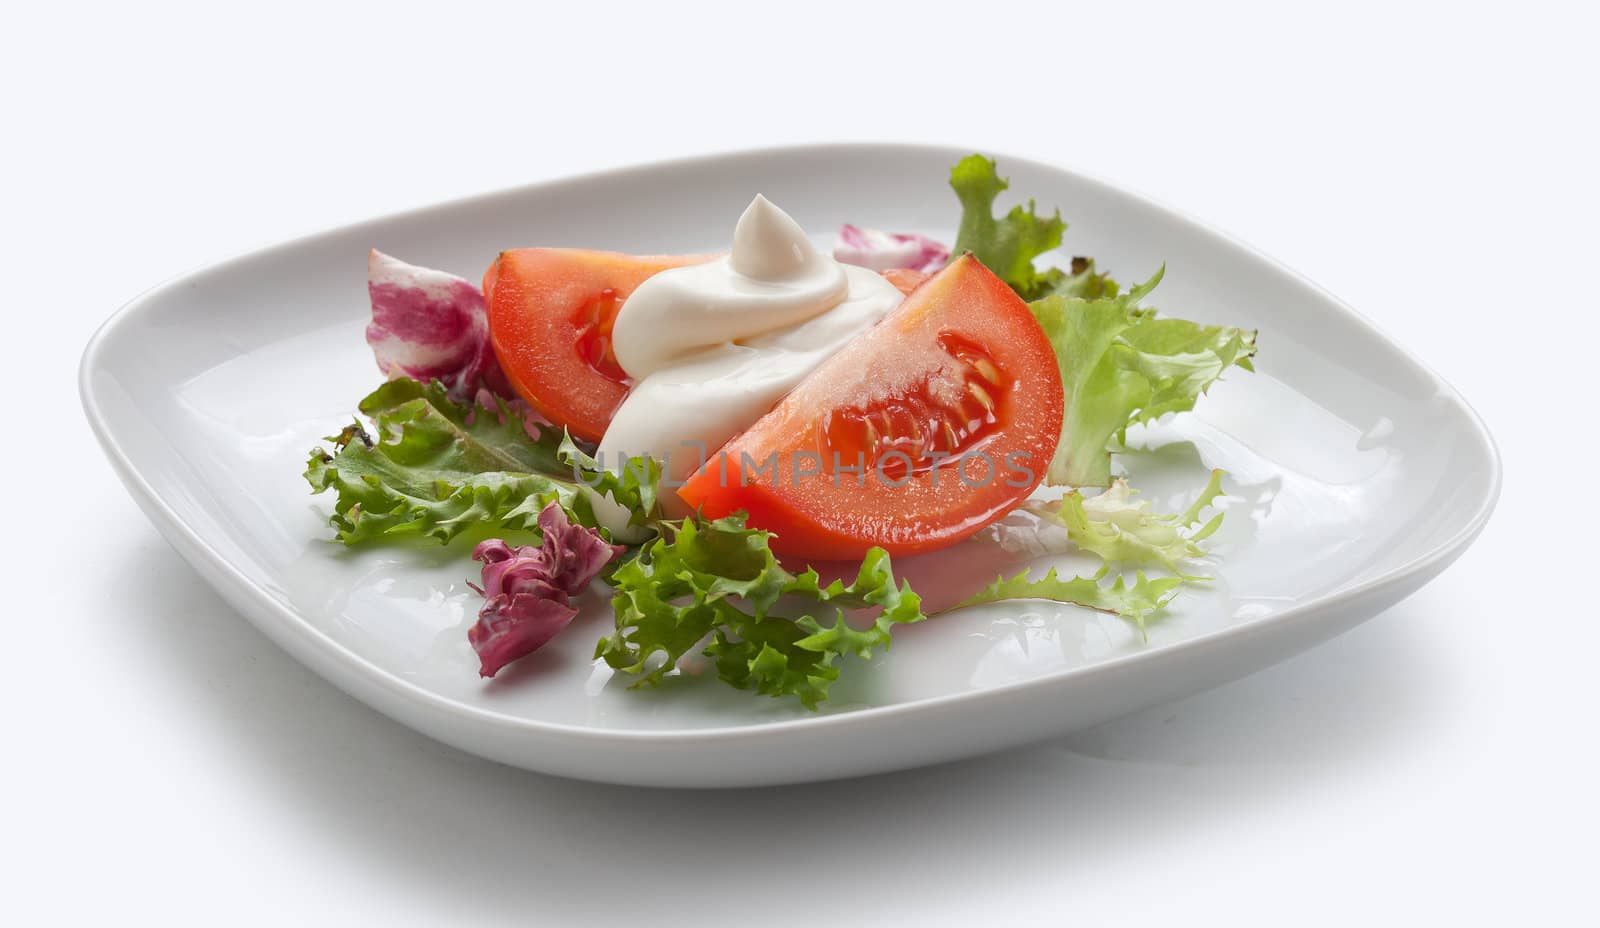 Two pieces of tomato with lettuce and mayonnaise